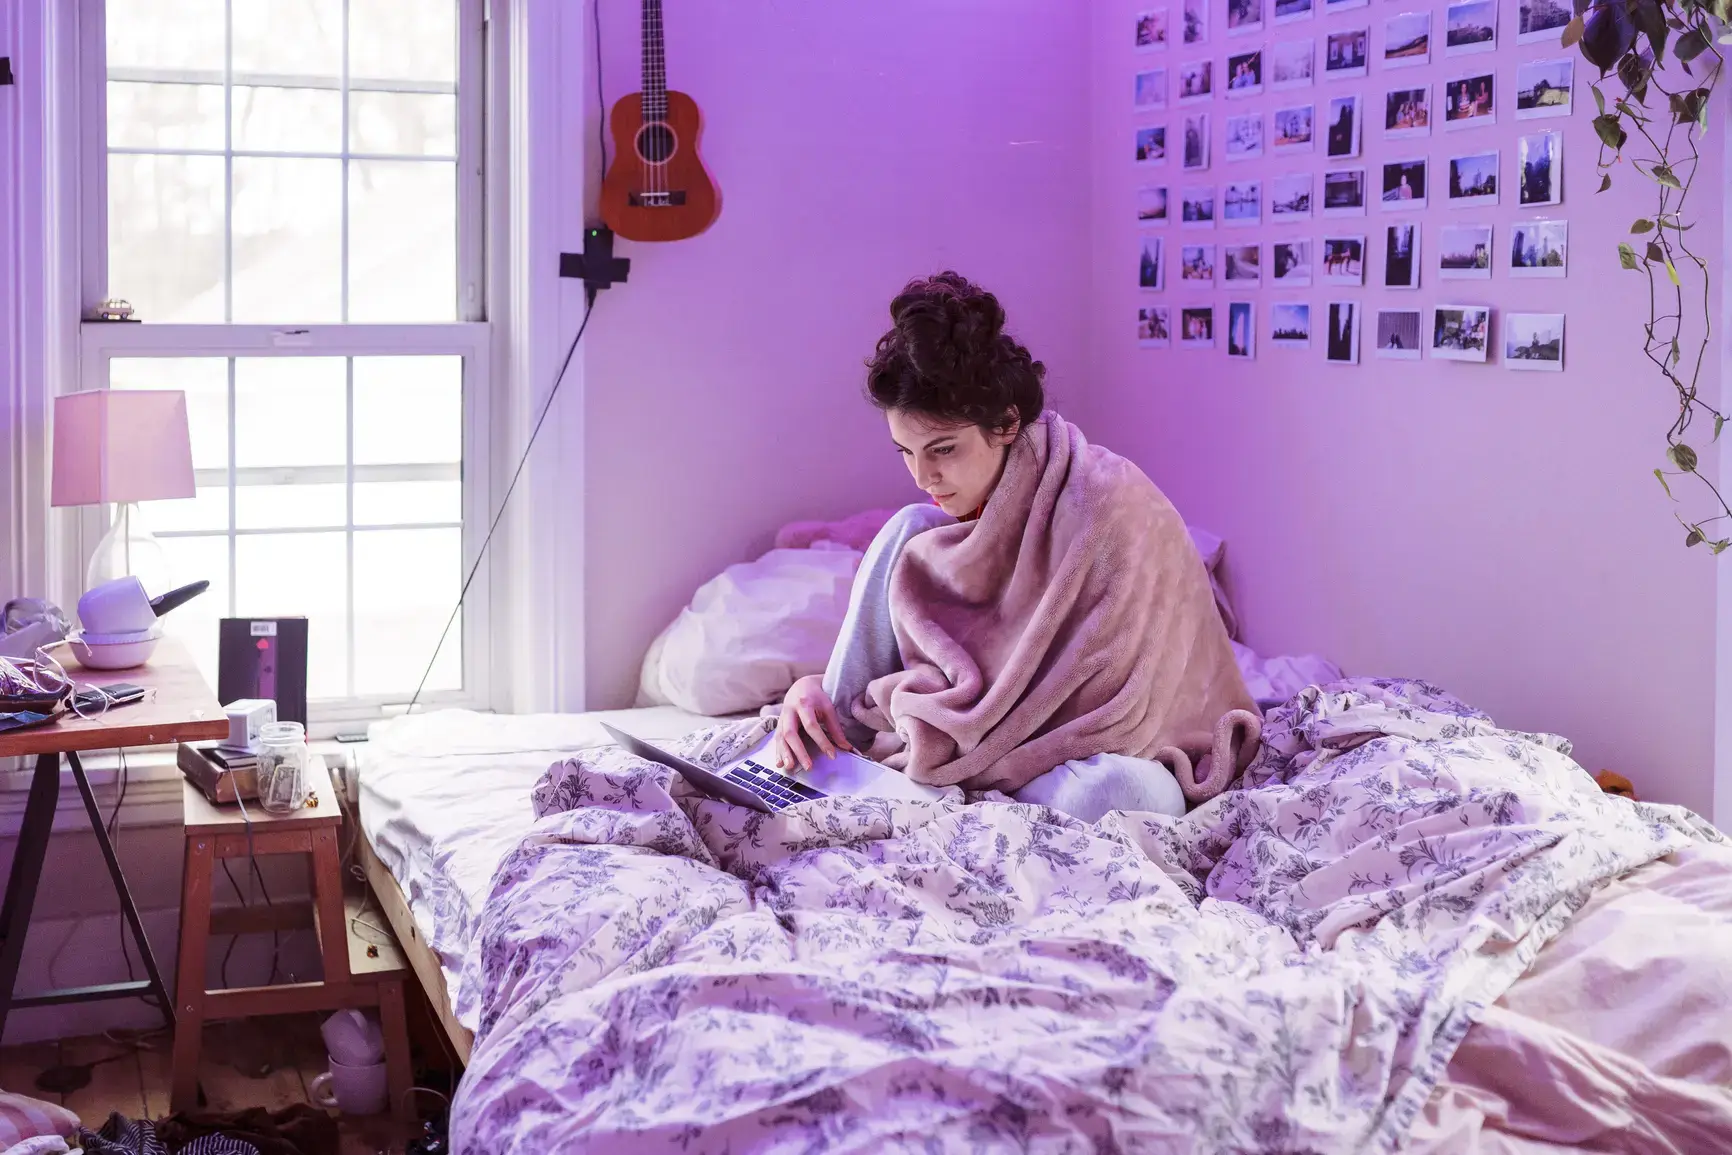 A student sits on her bed, snuggled in blankets, studying on her laptop.